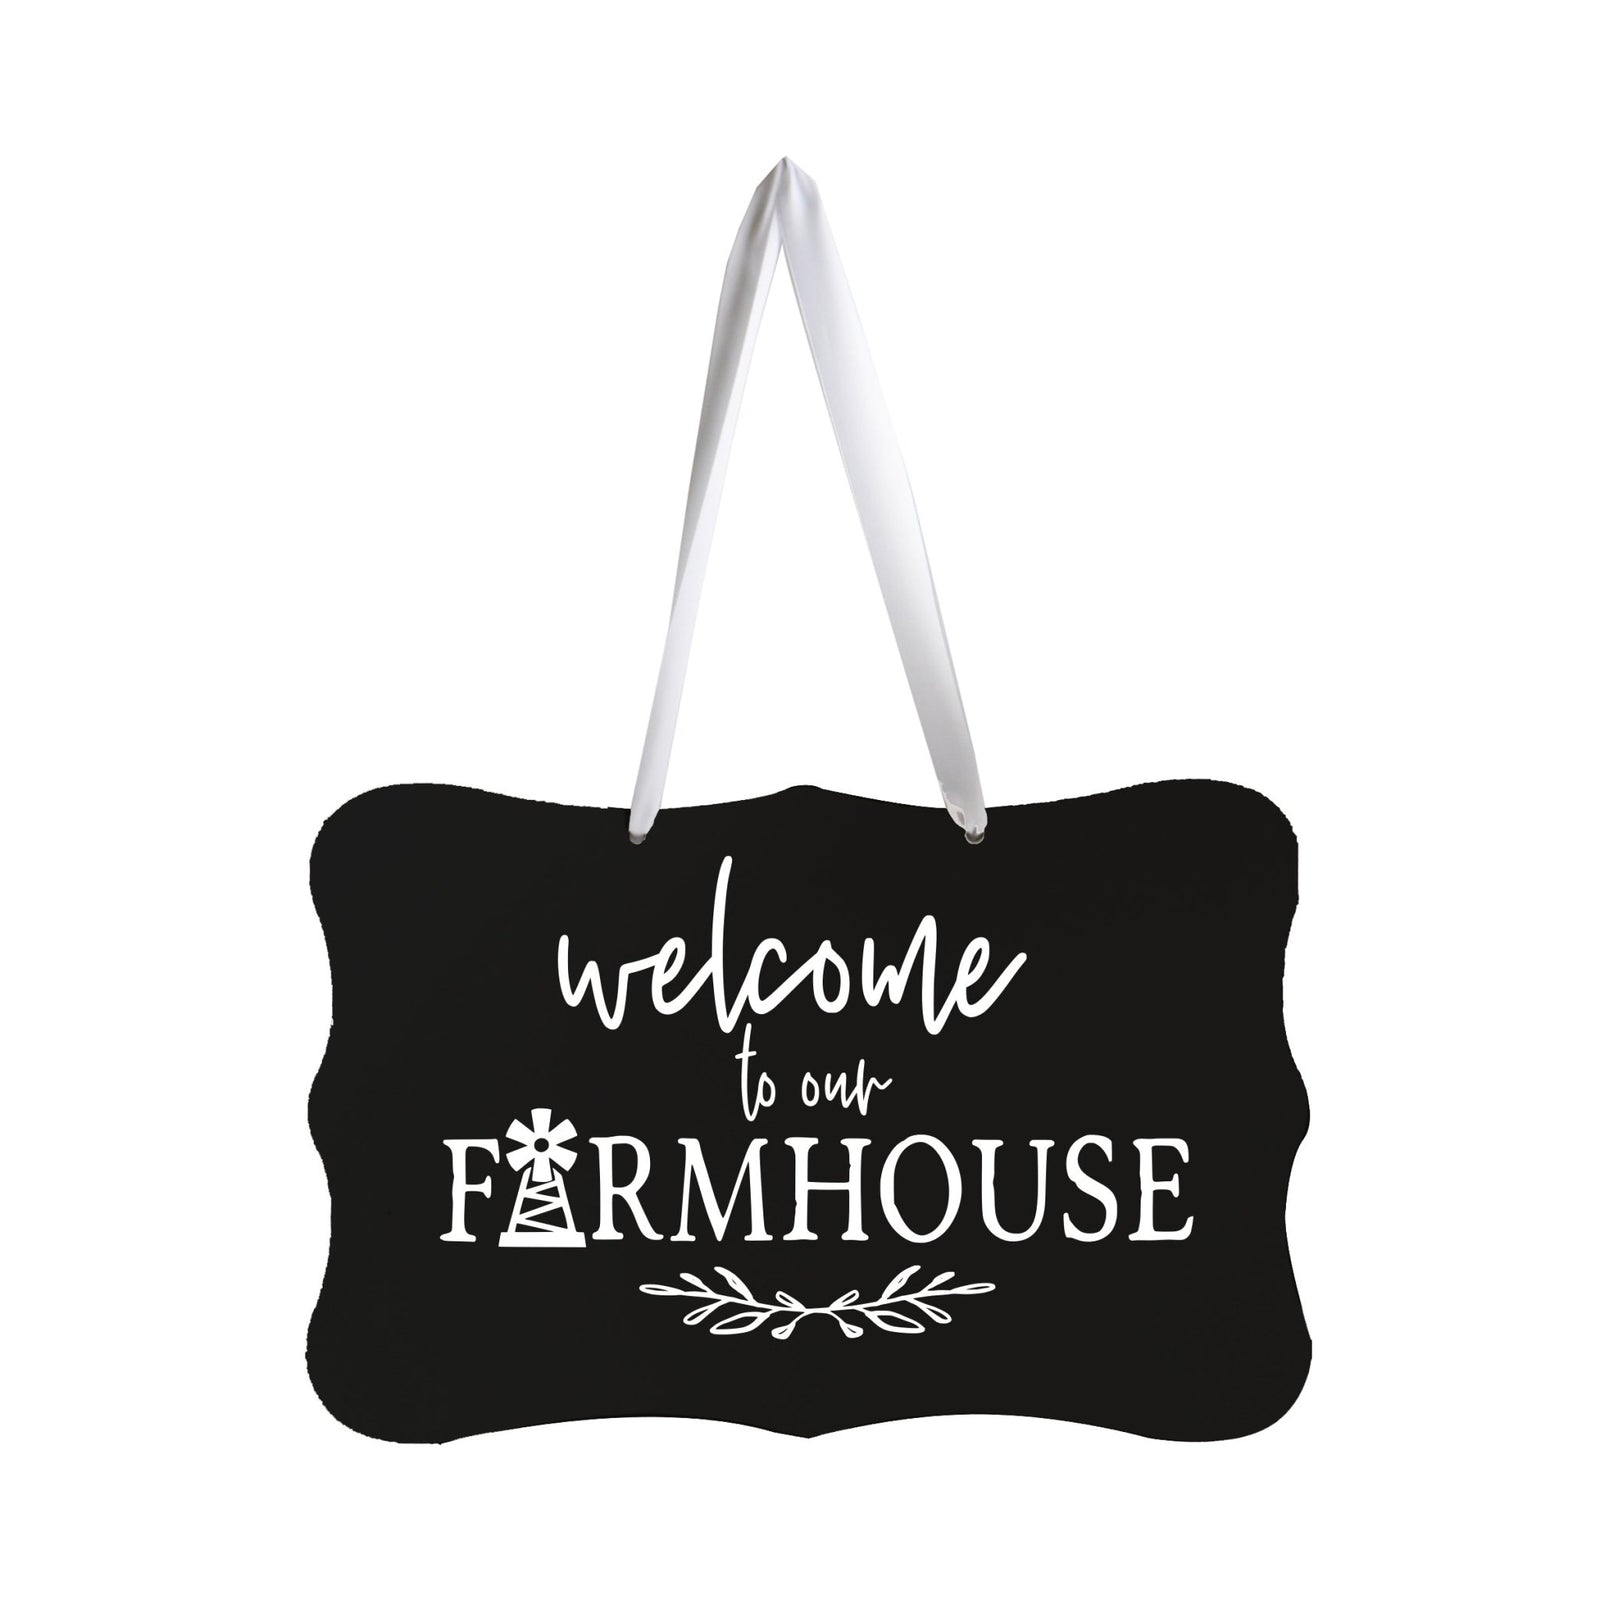 Modern Inspirational Wooden Wall Hanging Sign for Home Decorations 8x12 - Welcome To Our Farmhouse (Leaf) - LifeSong Milestones